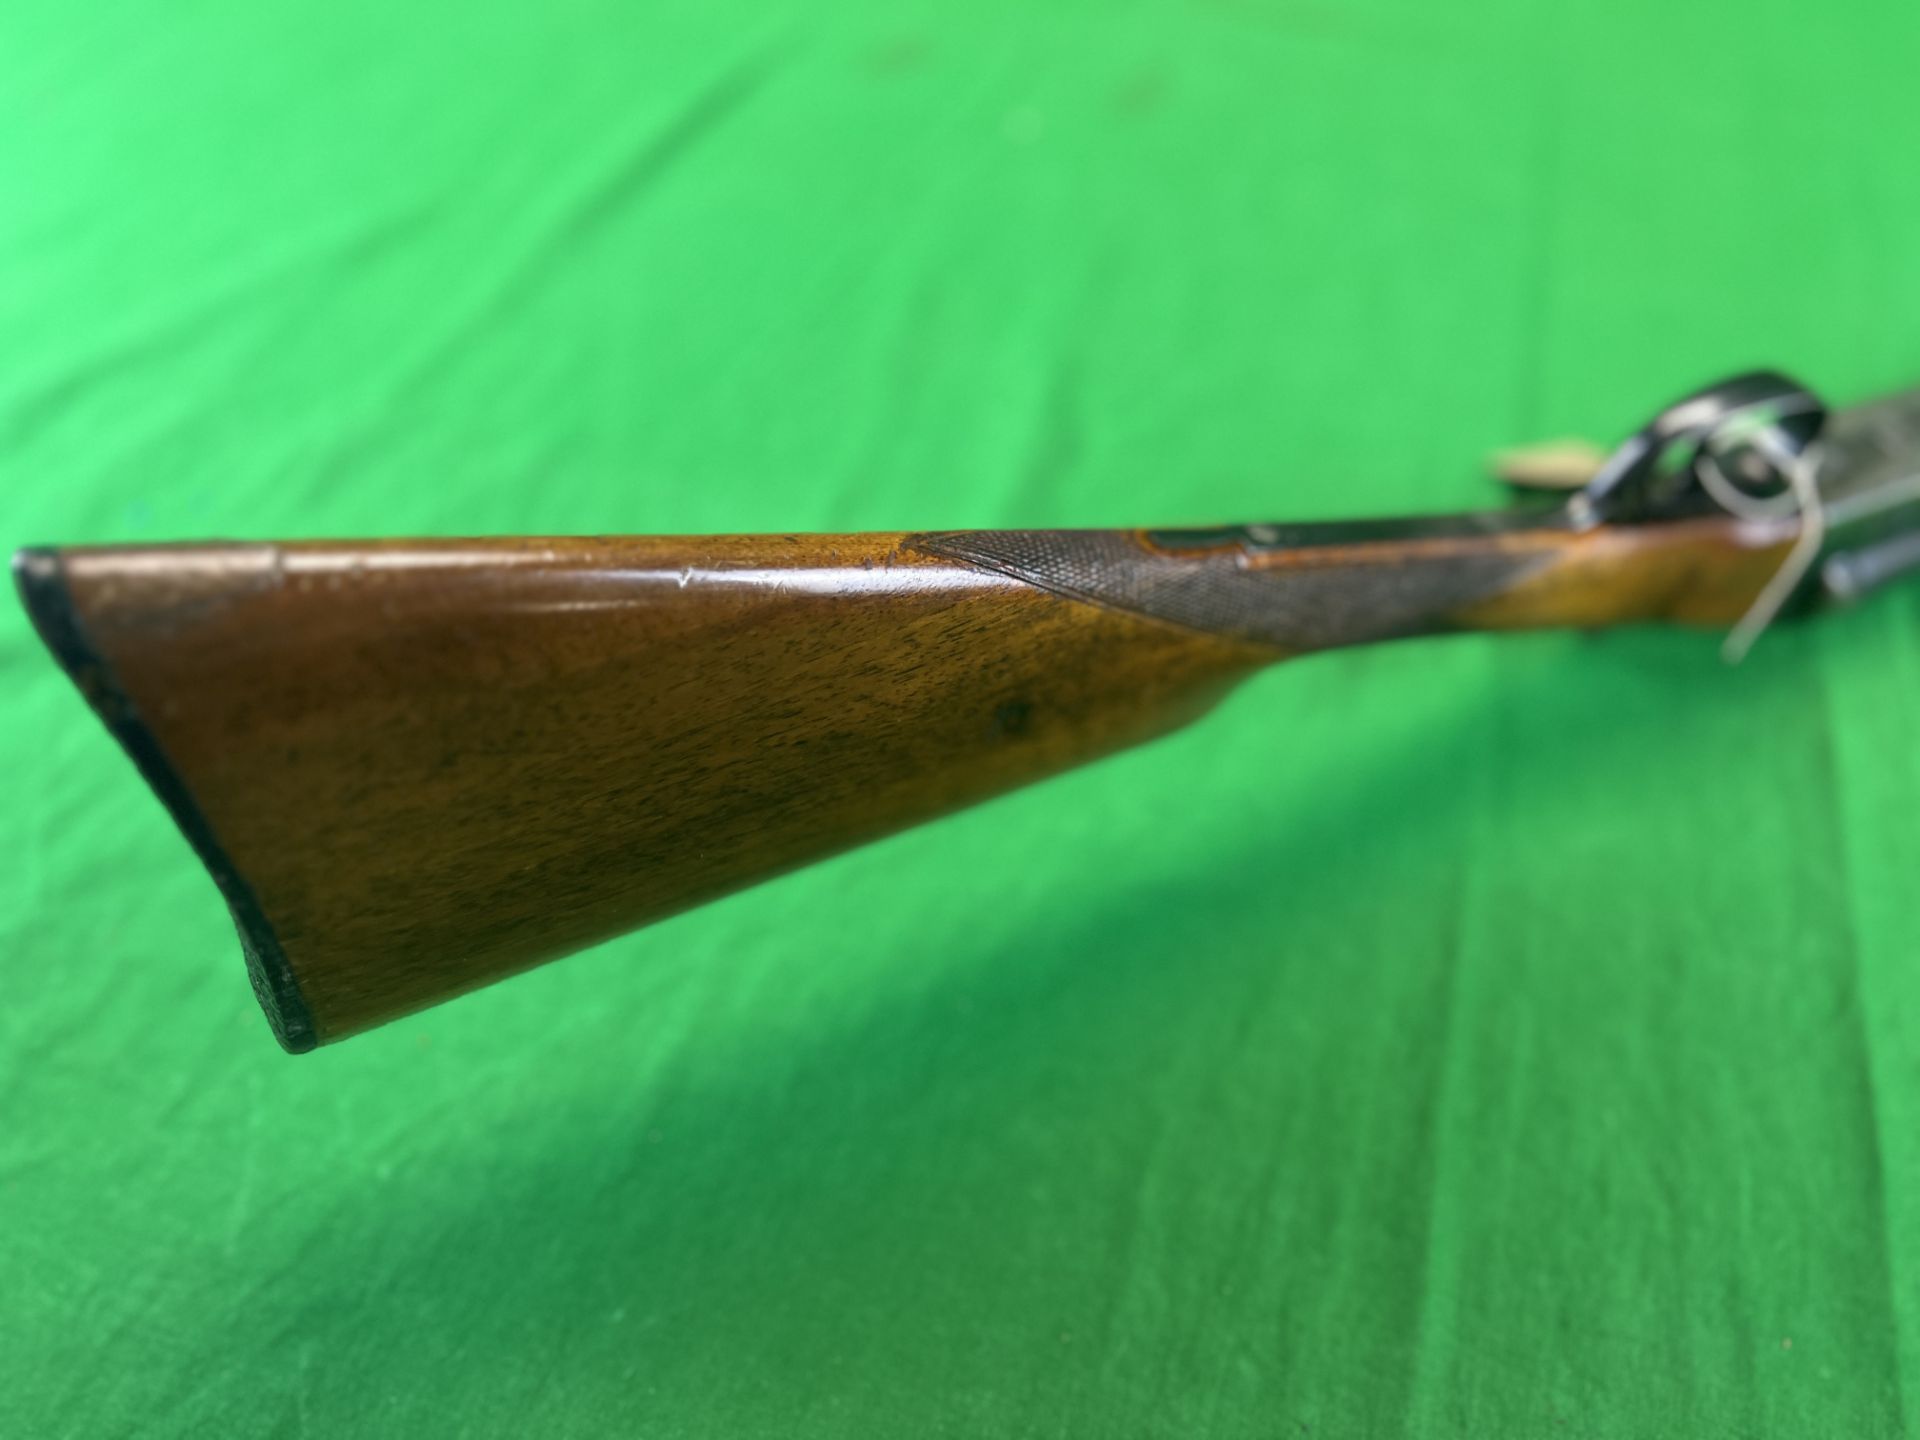 UGARTECHEA 20 BORE SIDE BY SIDE SHOTGUN COMPLETE WITH GUN SLEEVE # 77570 - (ALL GUNS TO BE - Image 9 of 11